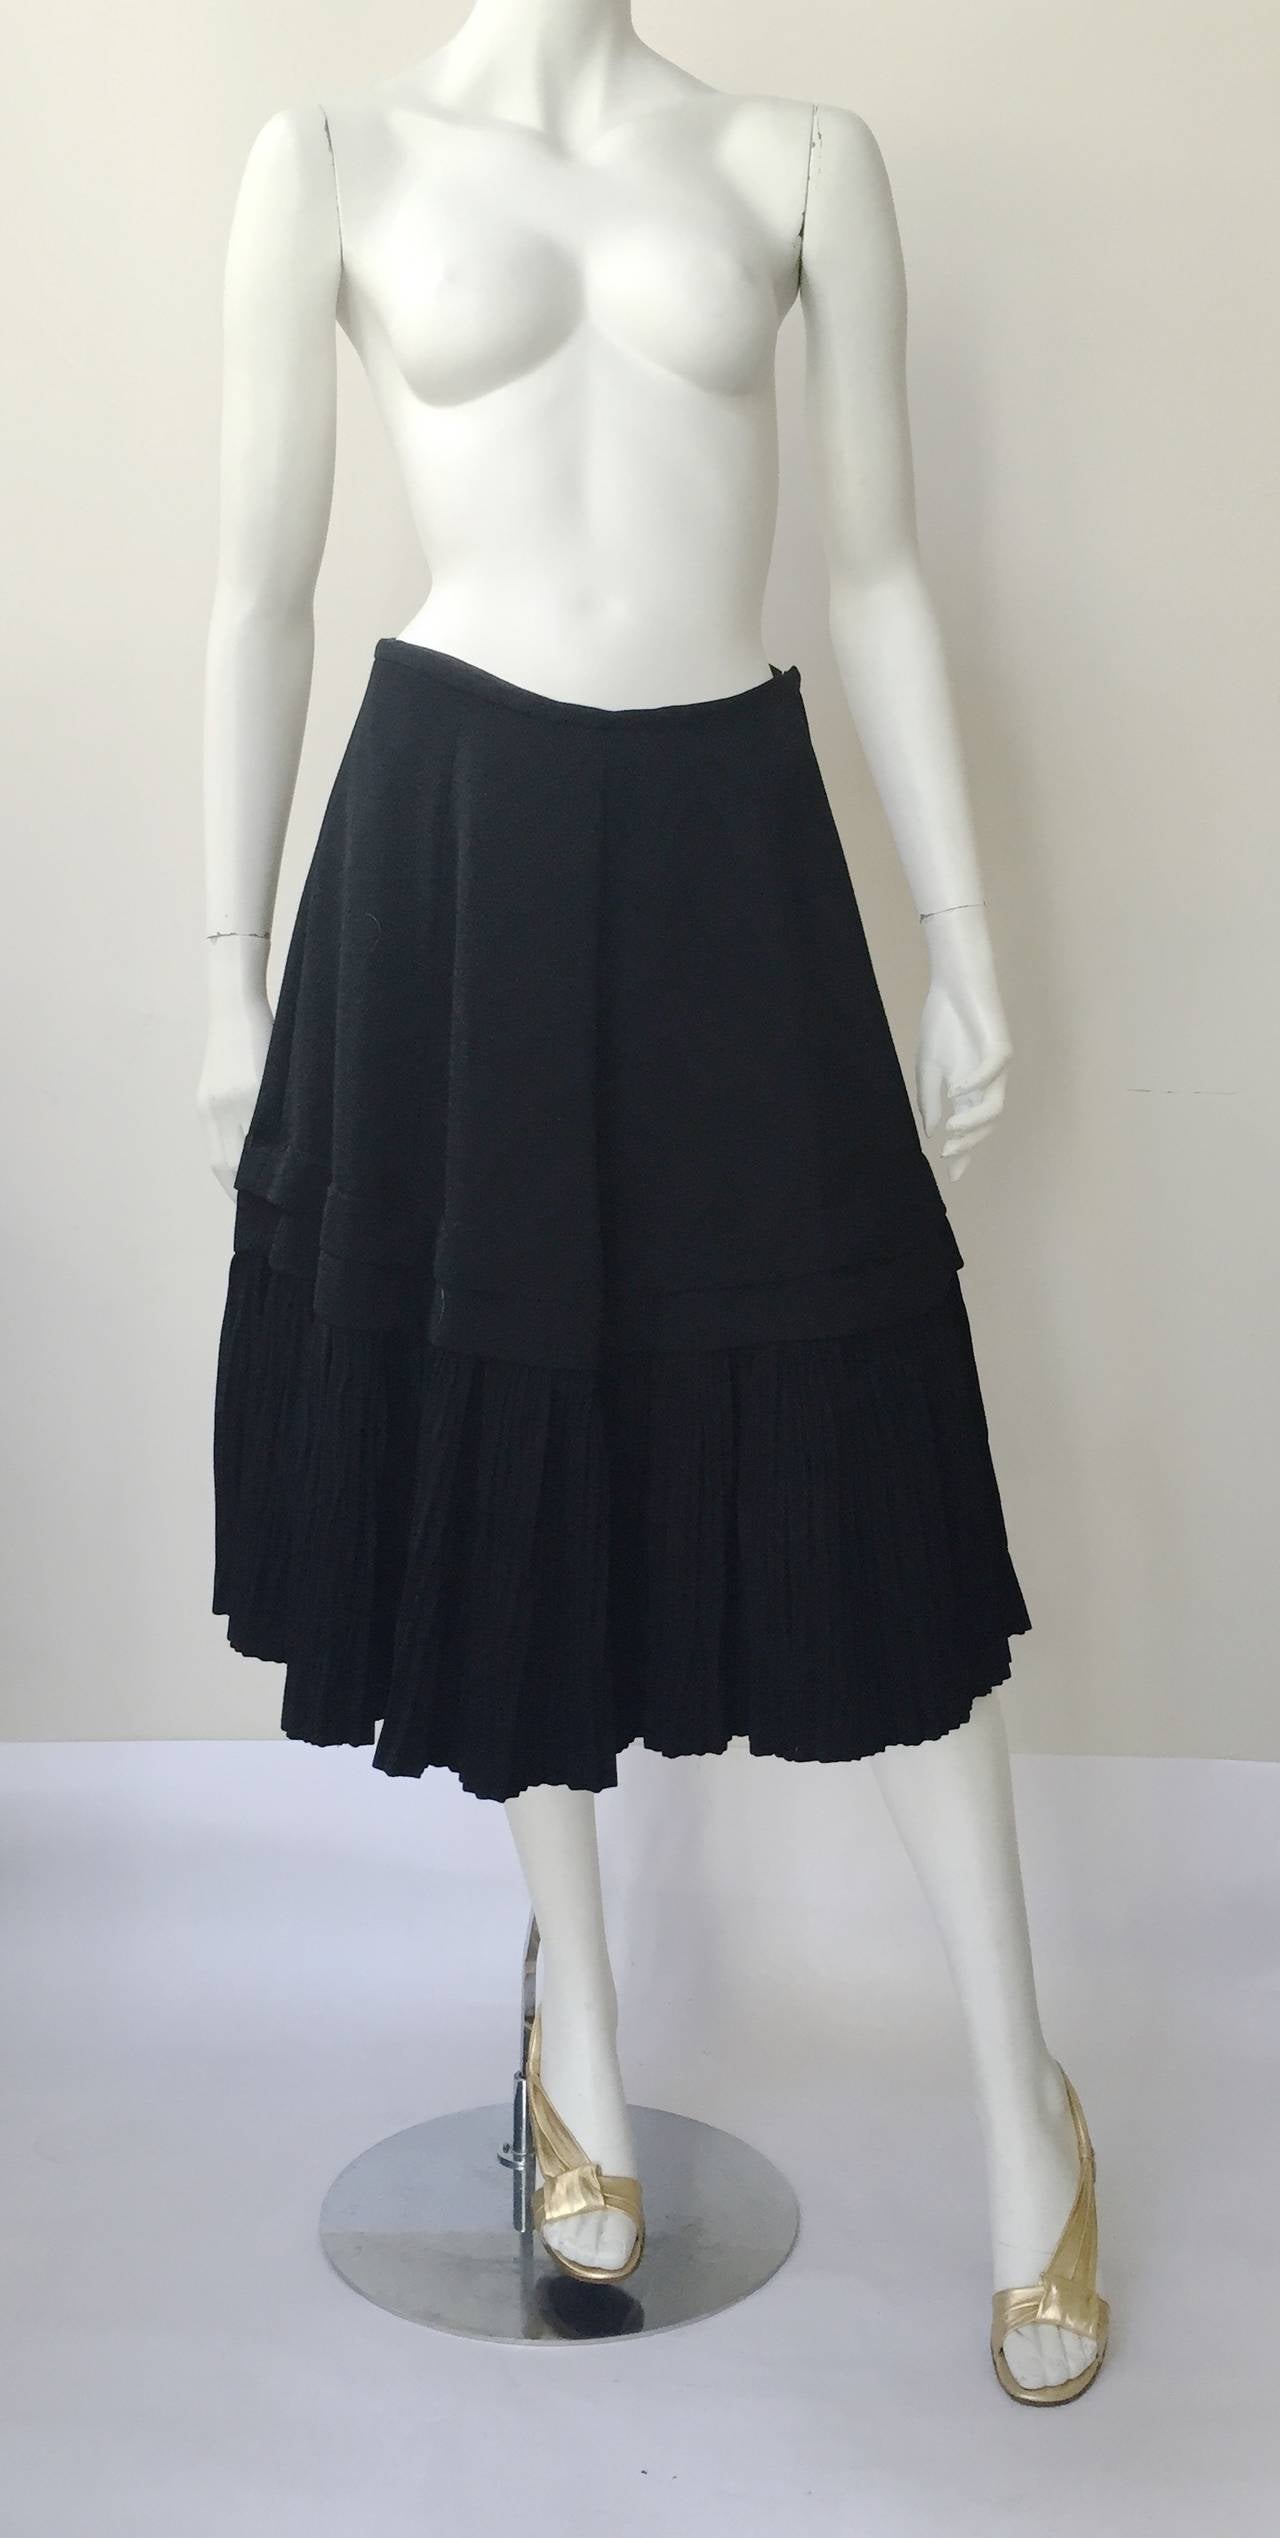 Comme des Garcons by Rei Kawakubo for Bergdorf Goodman skirt size medium. For Sale 6